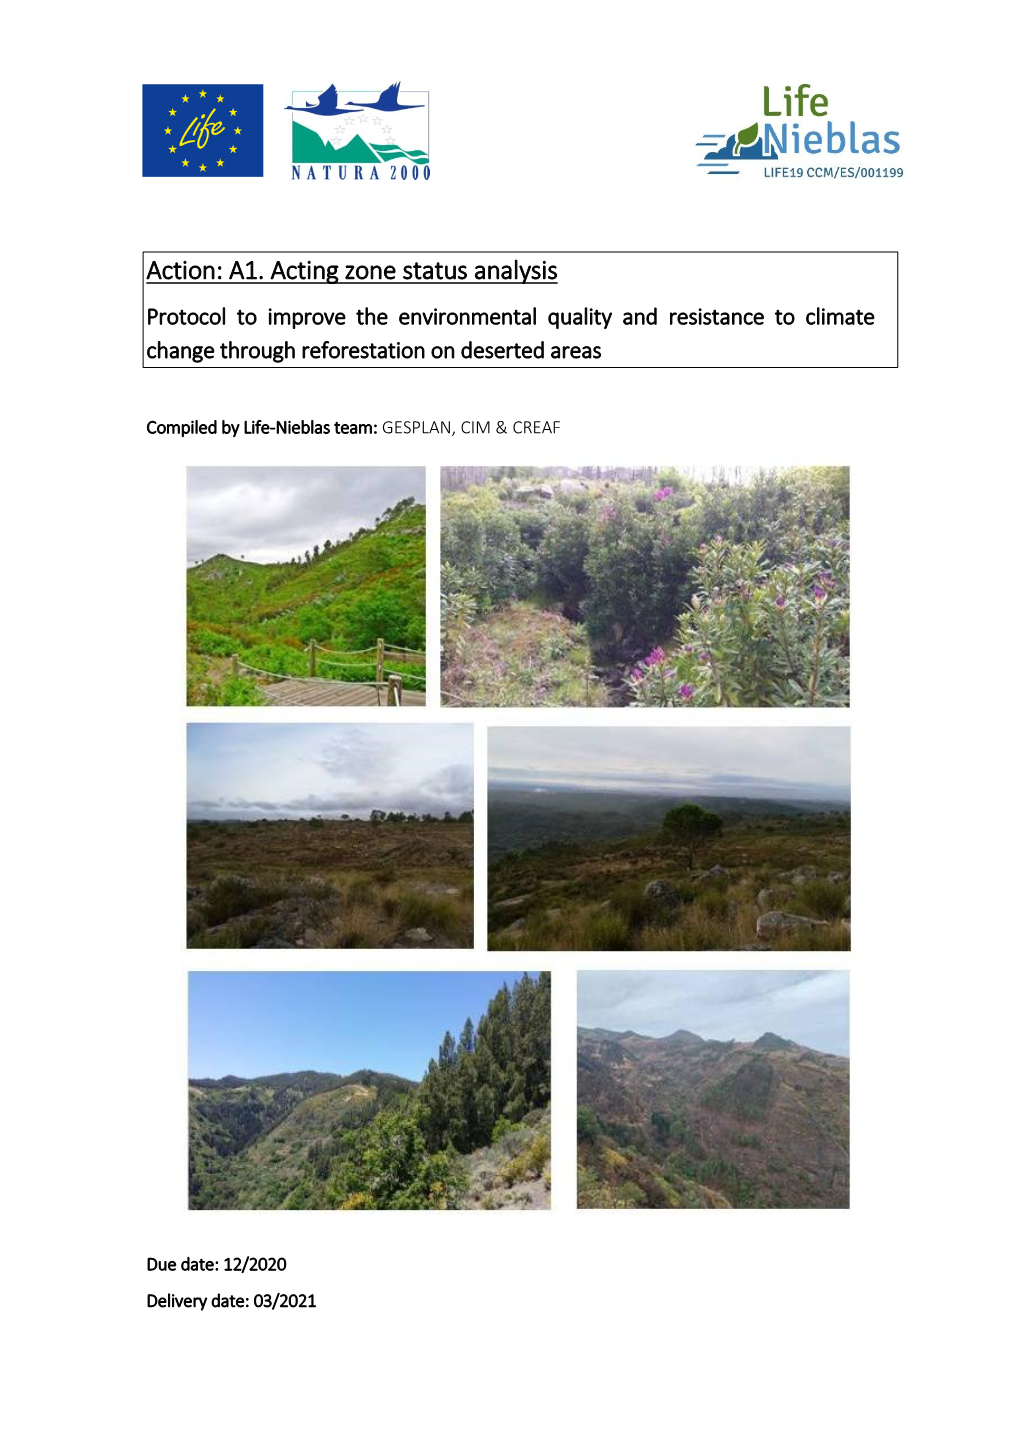 Action: A1. Acting Zone Status Analysis Protocol to Improve the Environmental Quality and Resistance to Climate Change Through Reforestation on Deserted Areas